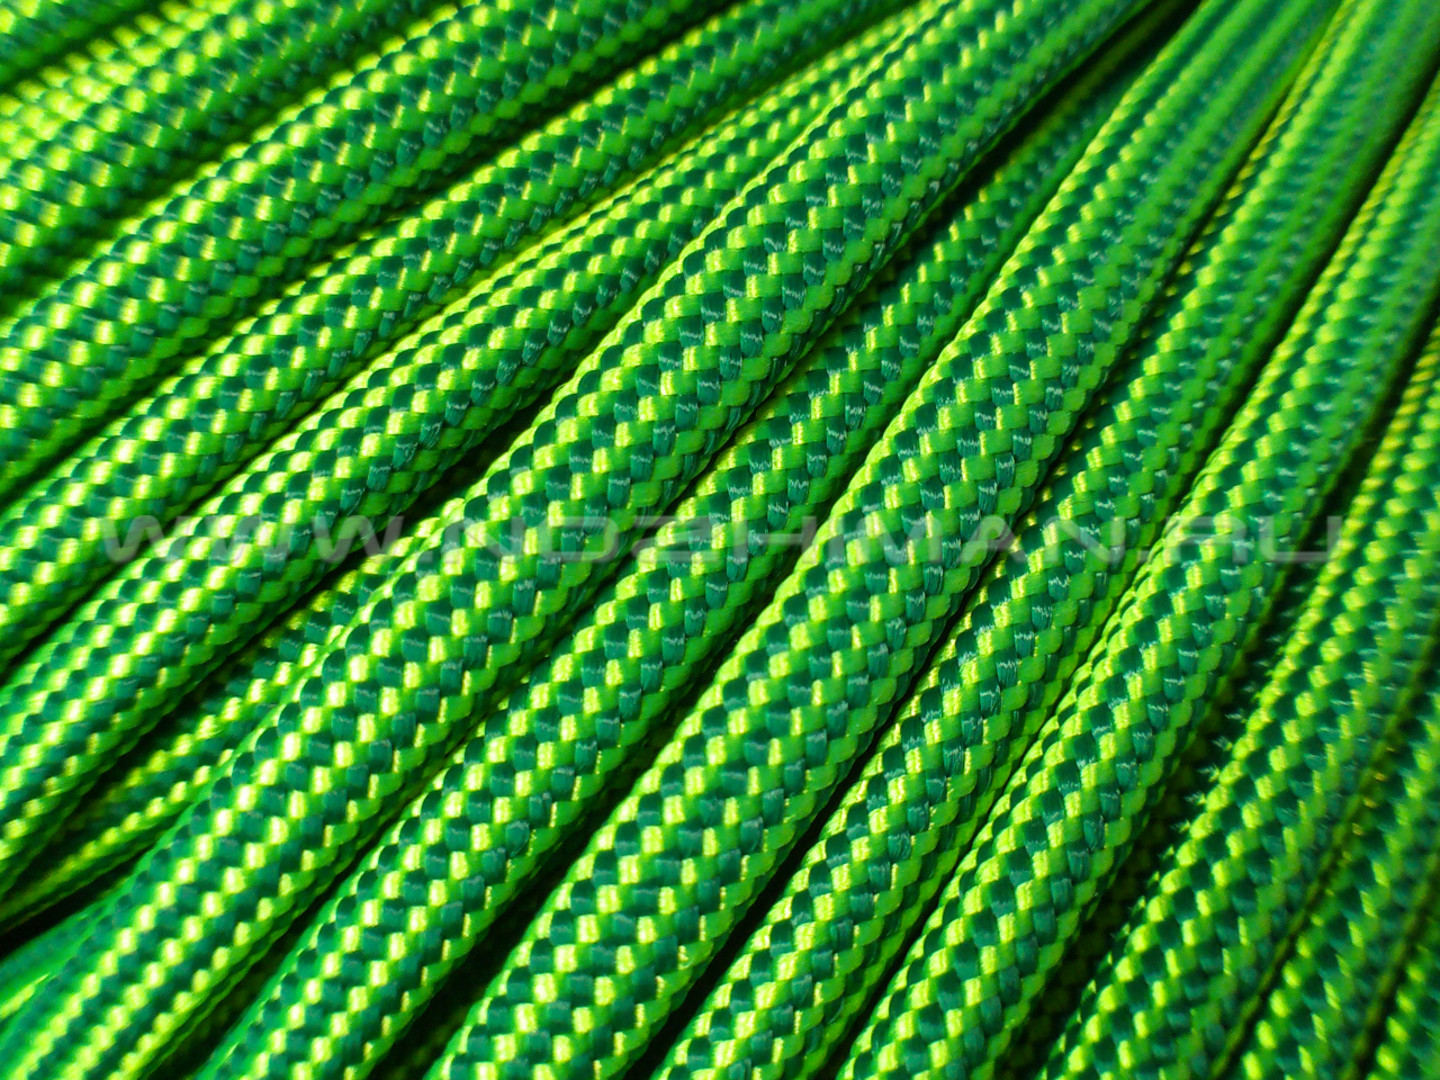 Paracord 550 Neon Yellow & Green Stripes